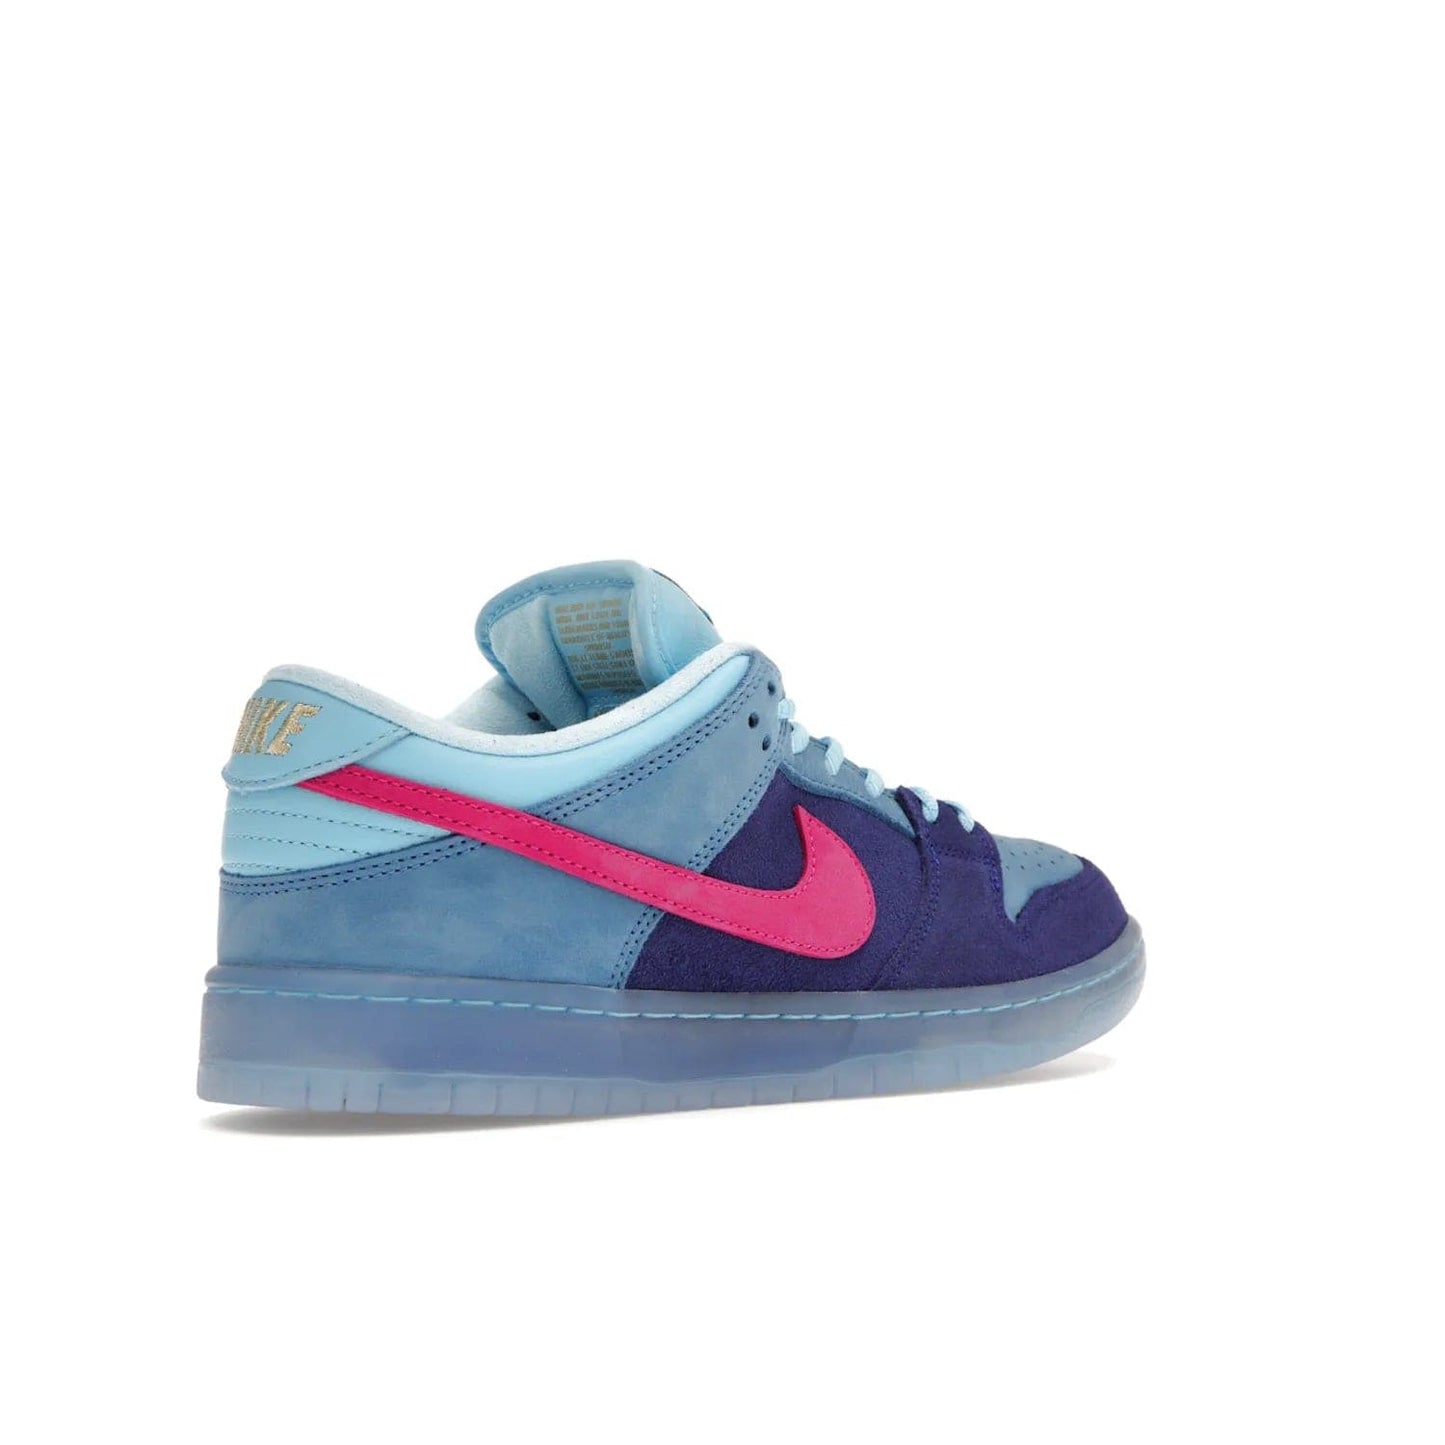 Nike SB Dunk Low Run The Jewels - Image 33 - Only at www.BallersClubKickz.com - The Nike SB Dunk Low Run The Jewels pays tribute to the Run the Jewels 3 album cover. It features a blue suede upper with pink suede accents, gold branding and 3 lace sets. RTJ insoles complete this limited edition sneaker. Get it now for your shoe collection.